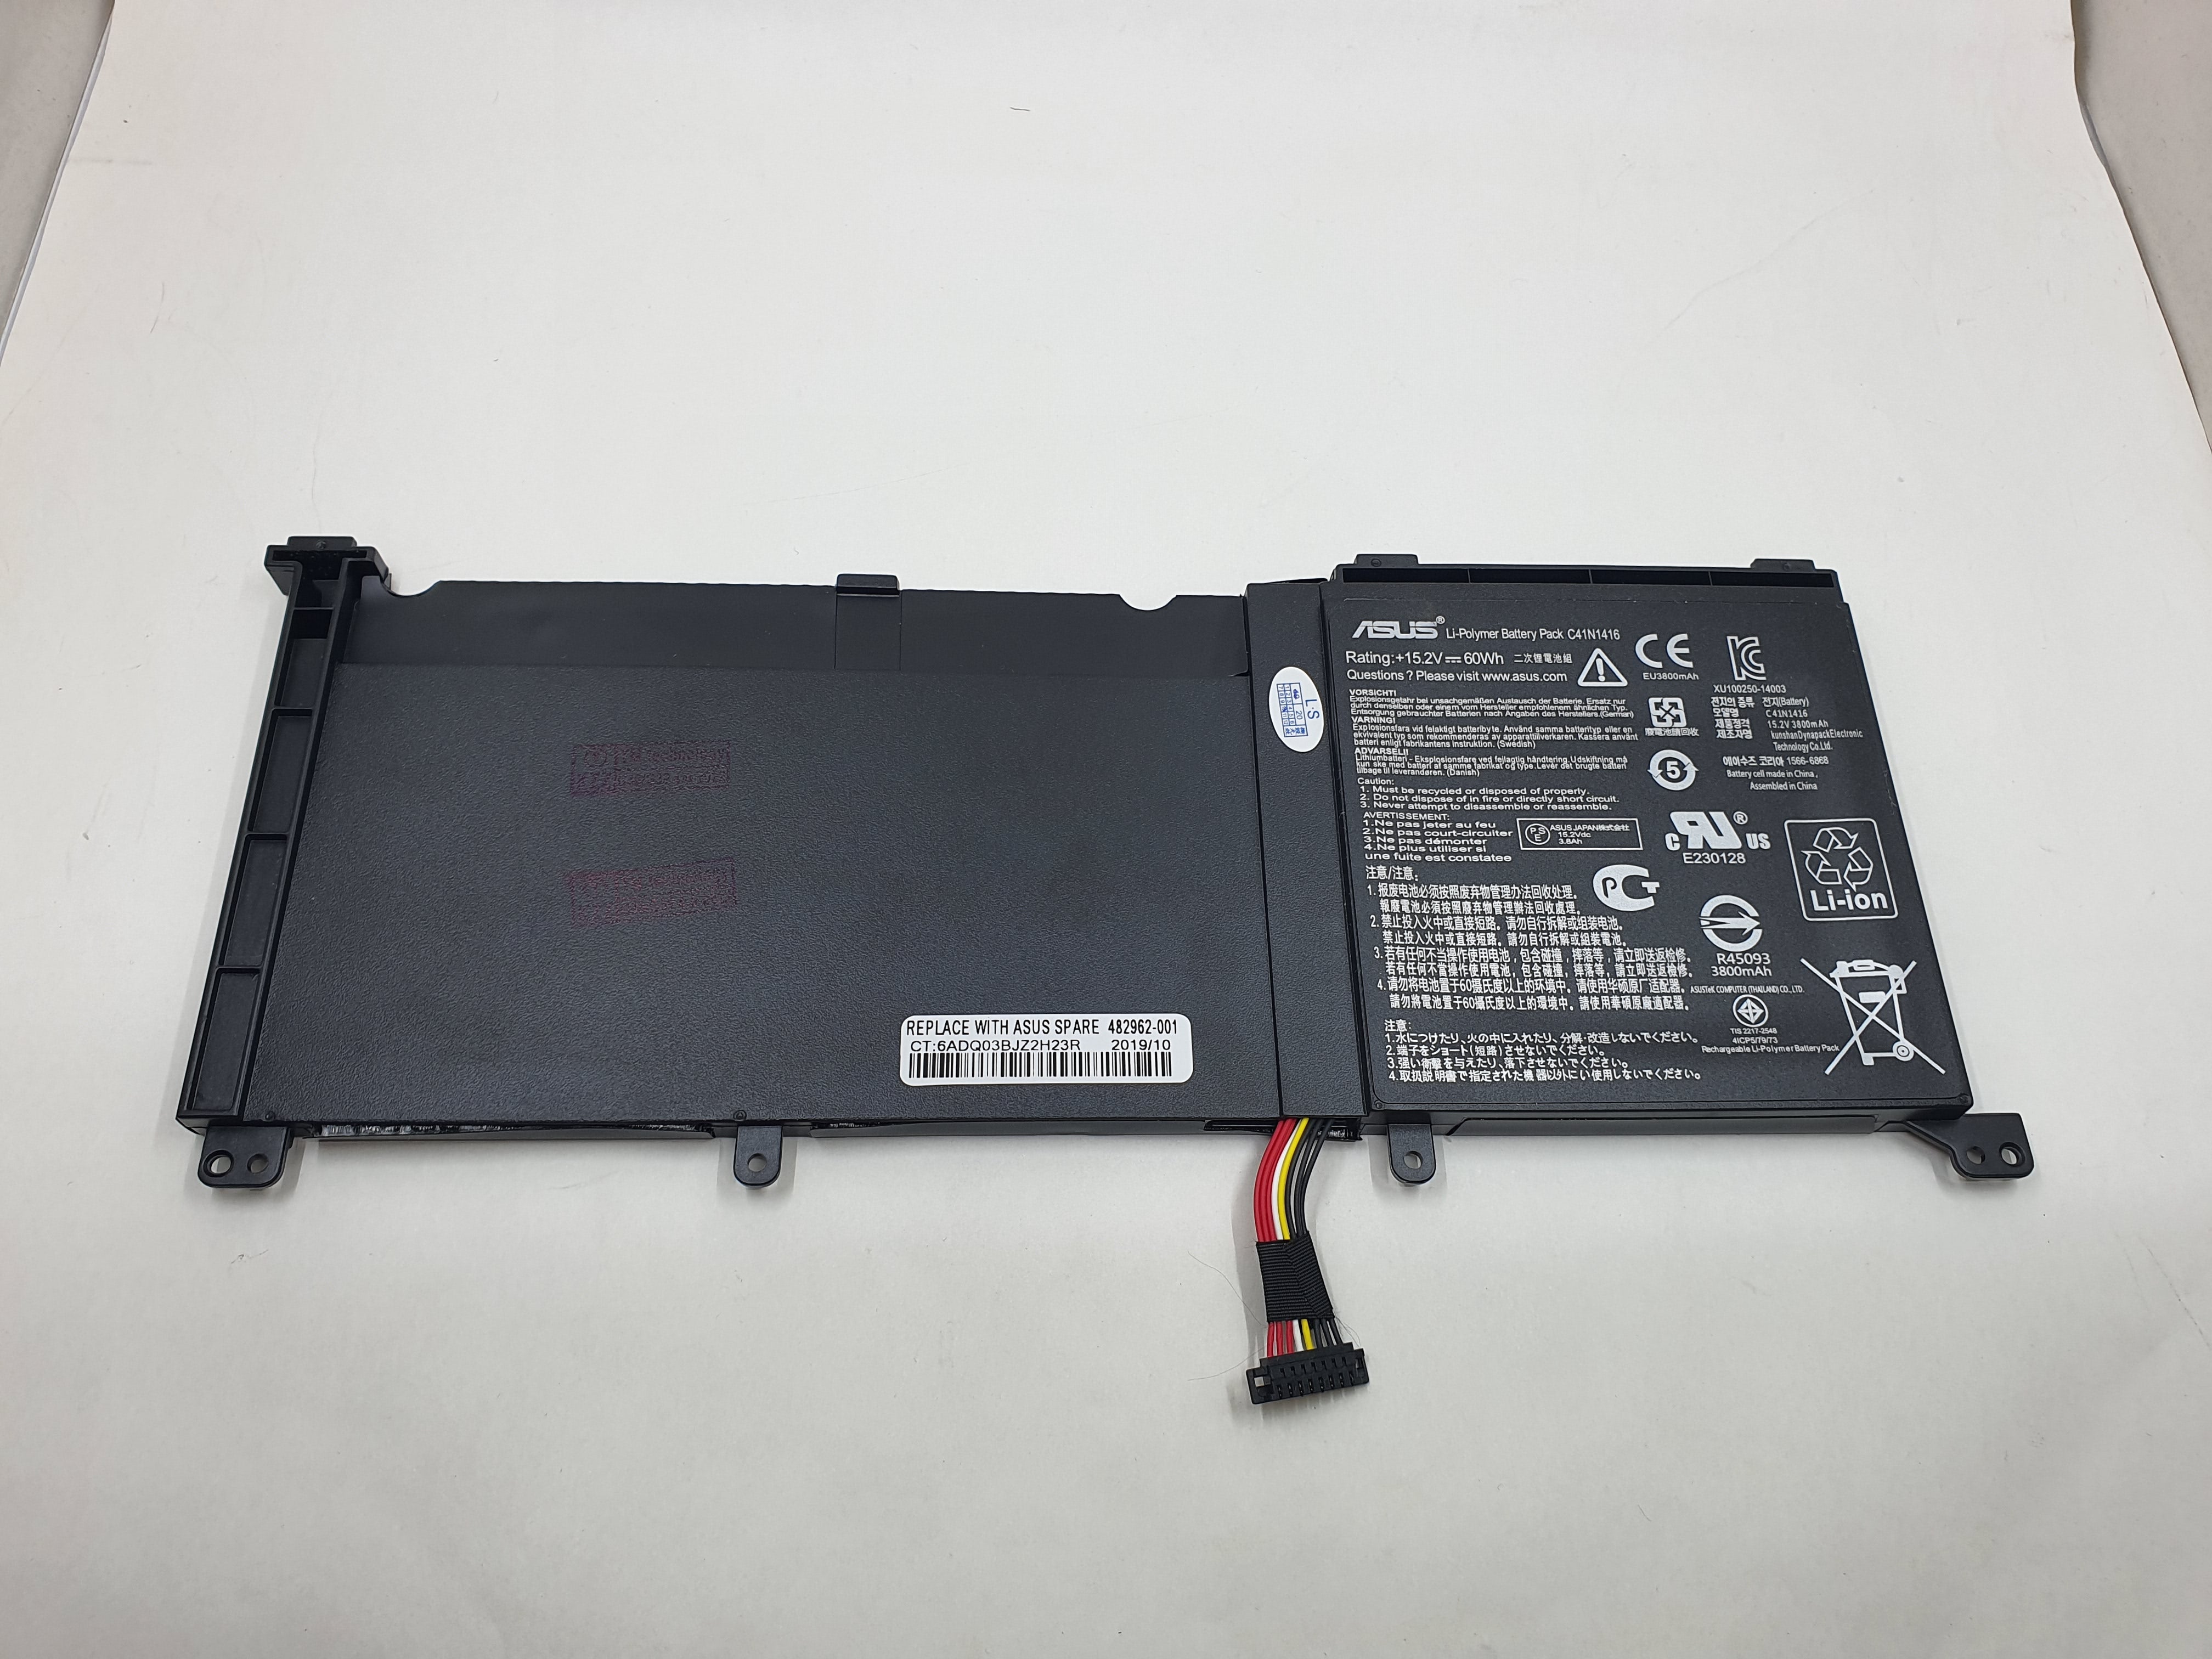 Asus Battery G501VW A1 for Replacement - Asus ROG G501VW